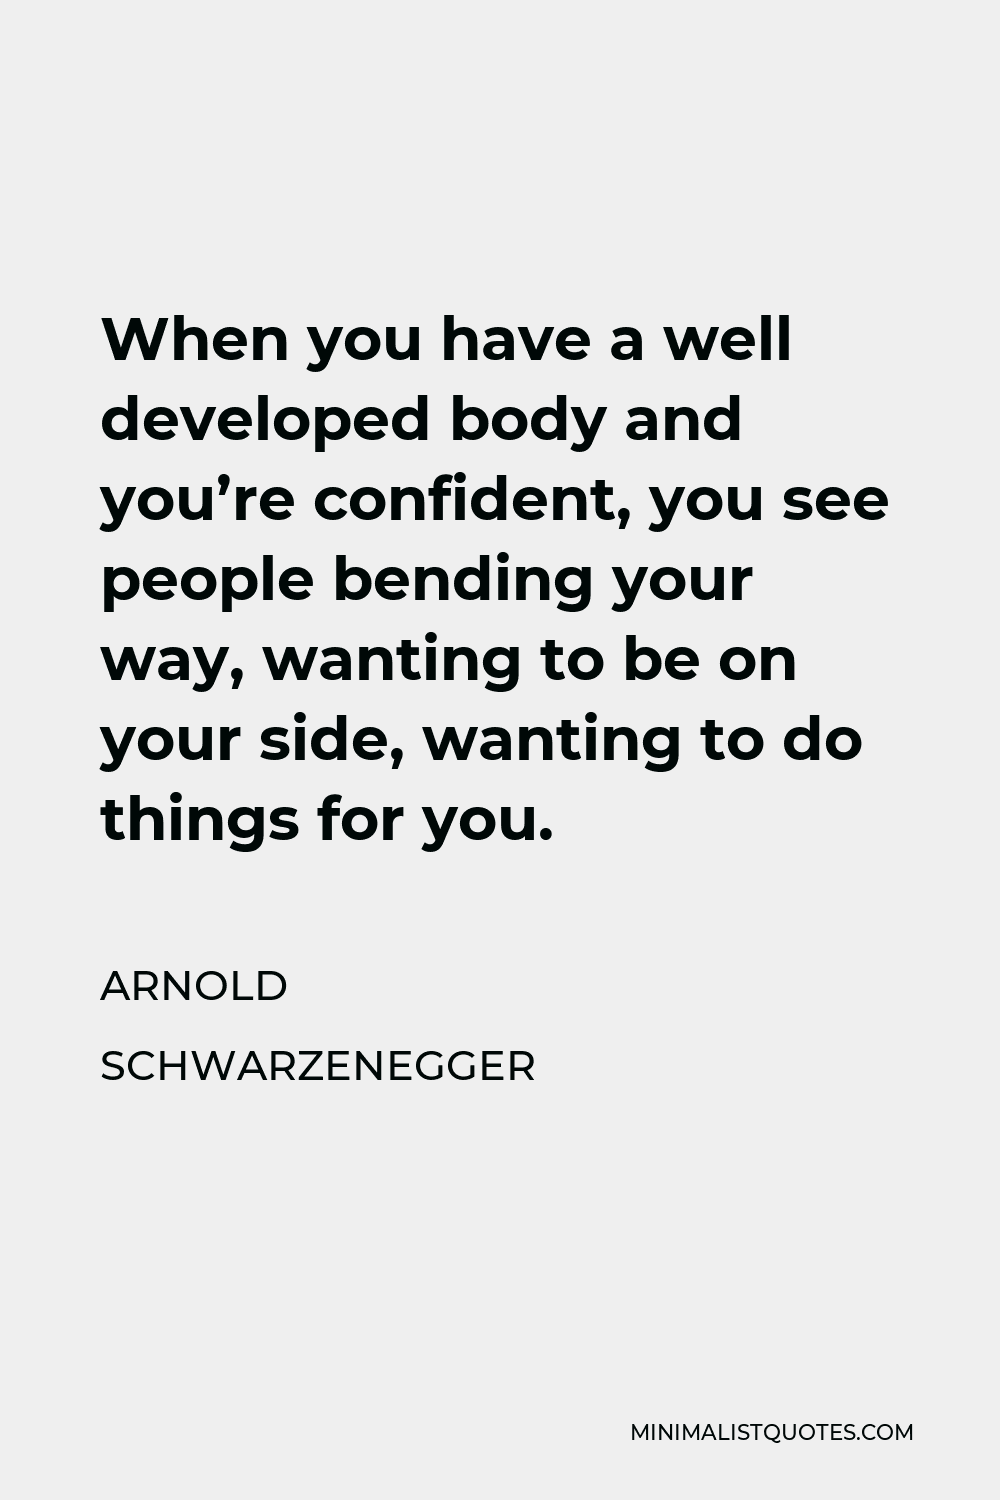 Arnold Schwarzenegger Quote - When you have a well developed body and you’re confident, you see people bending your way, wanting to be on your side, wanting to do things for you.